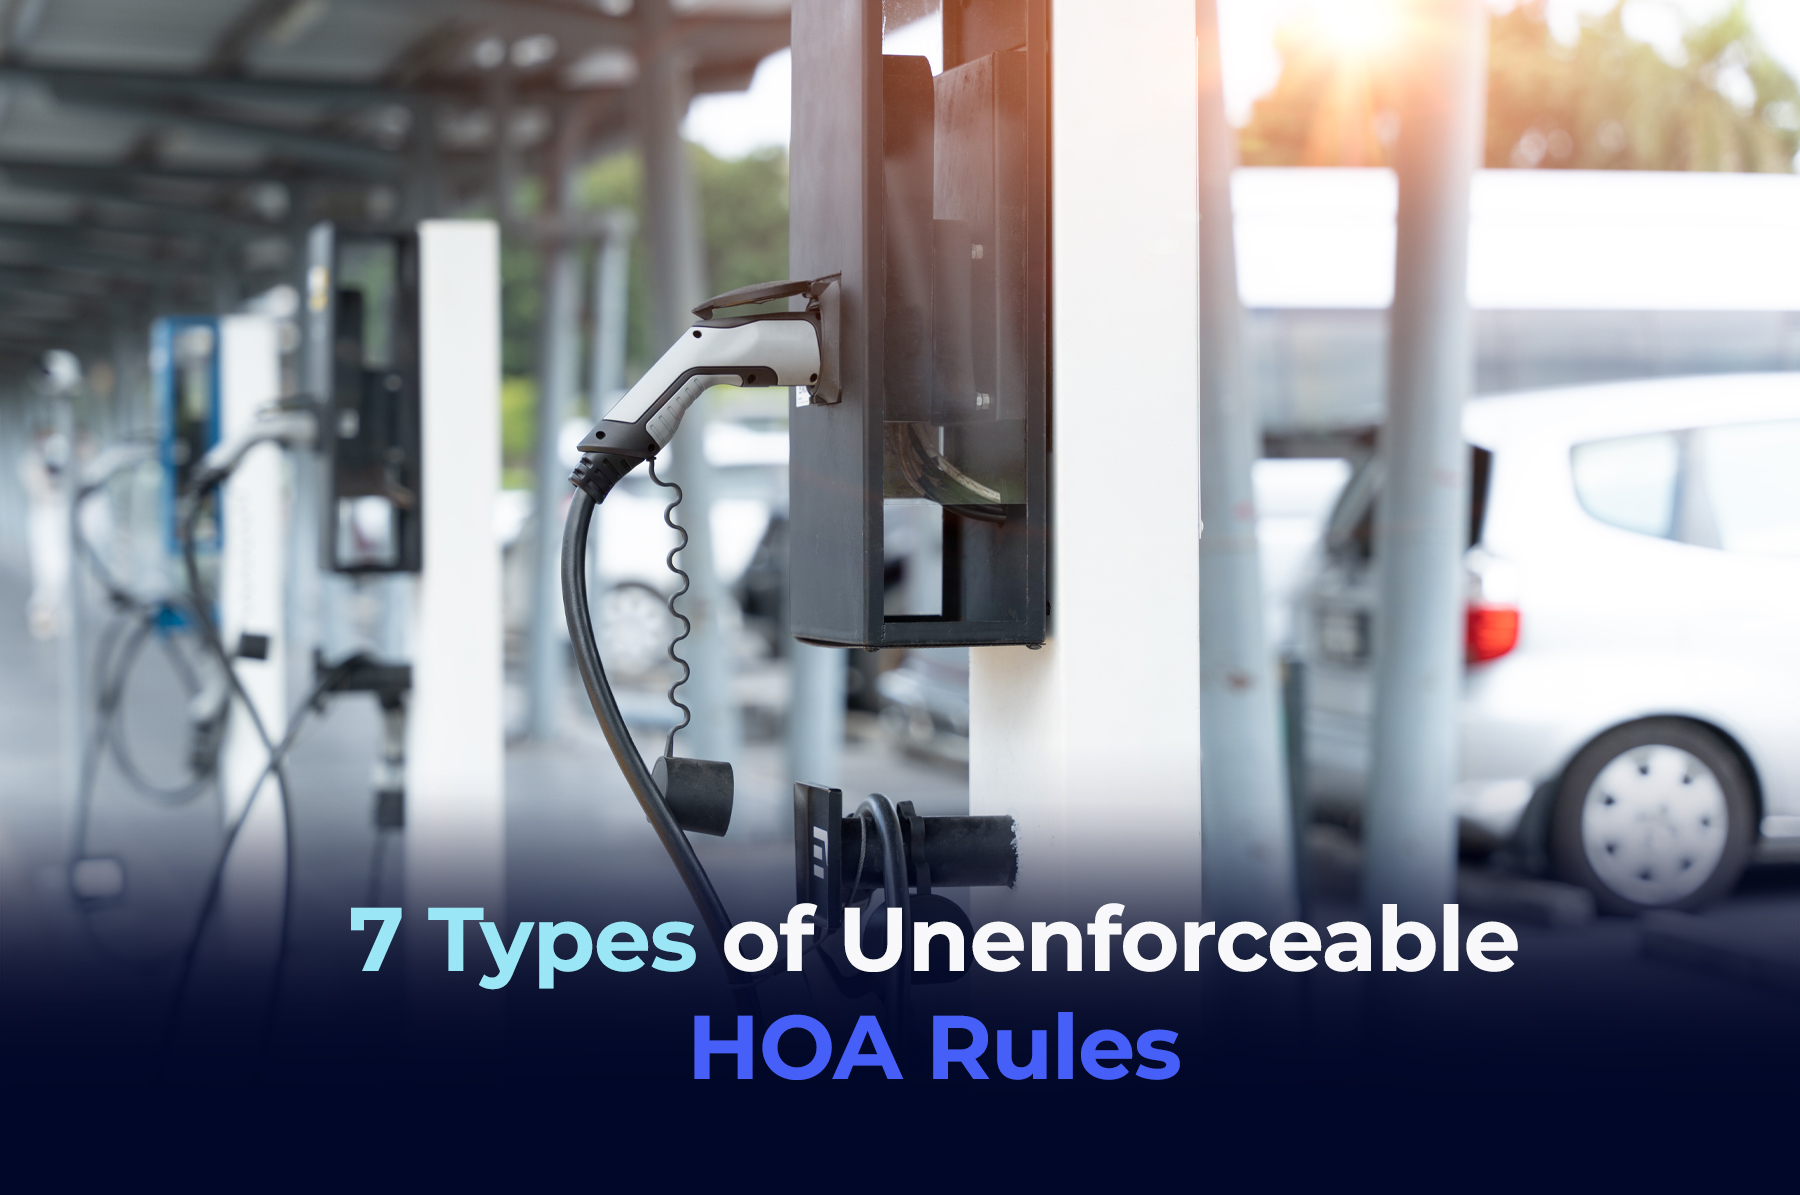 A picture of a parking lot with electric car charging station and the phrase "7 Types of Unenforceable HOA Rule""s